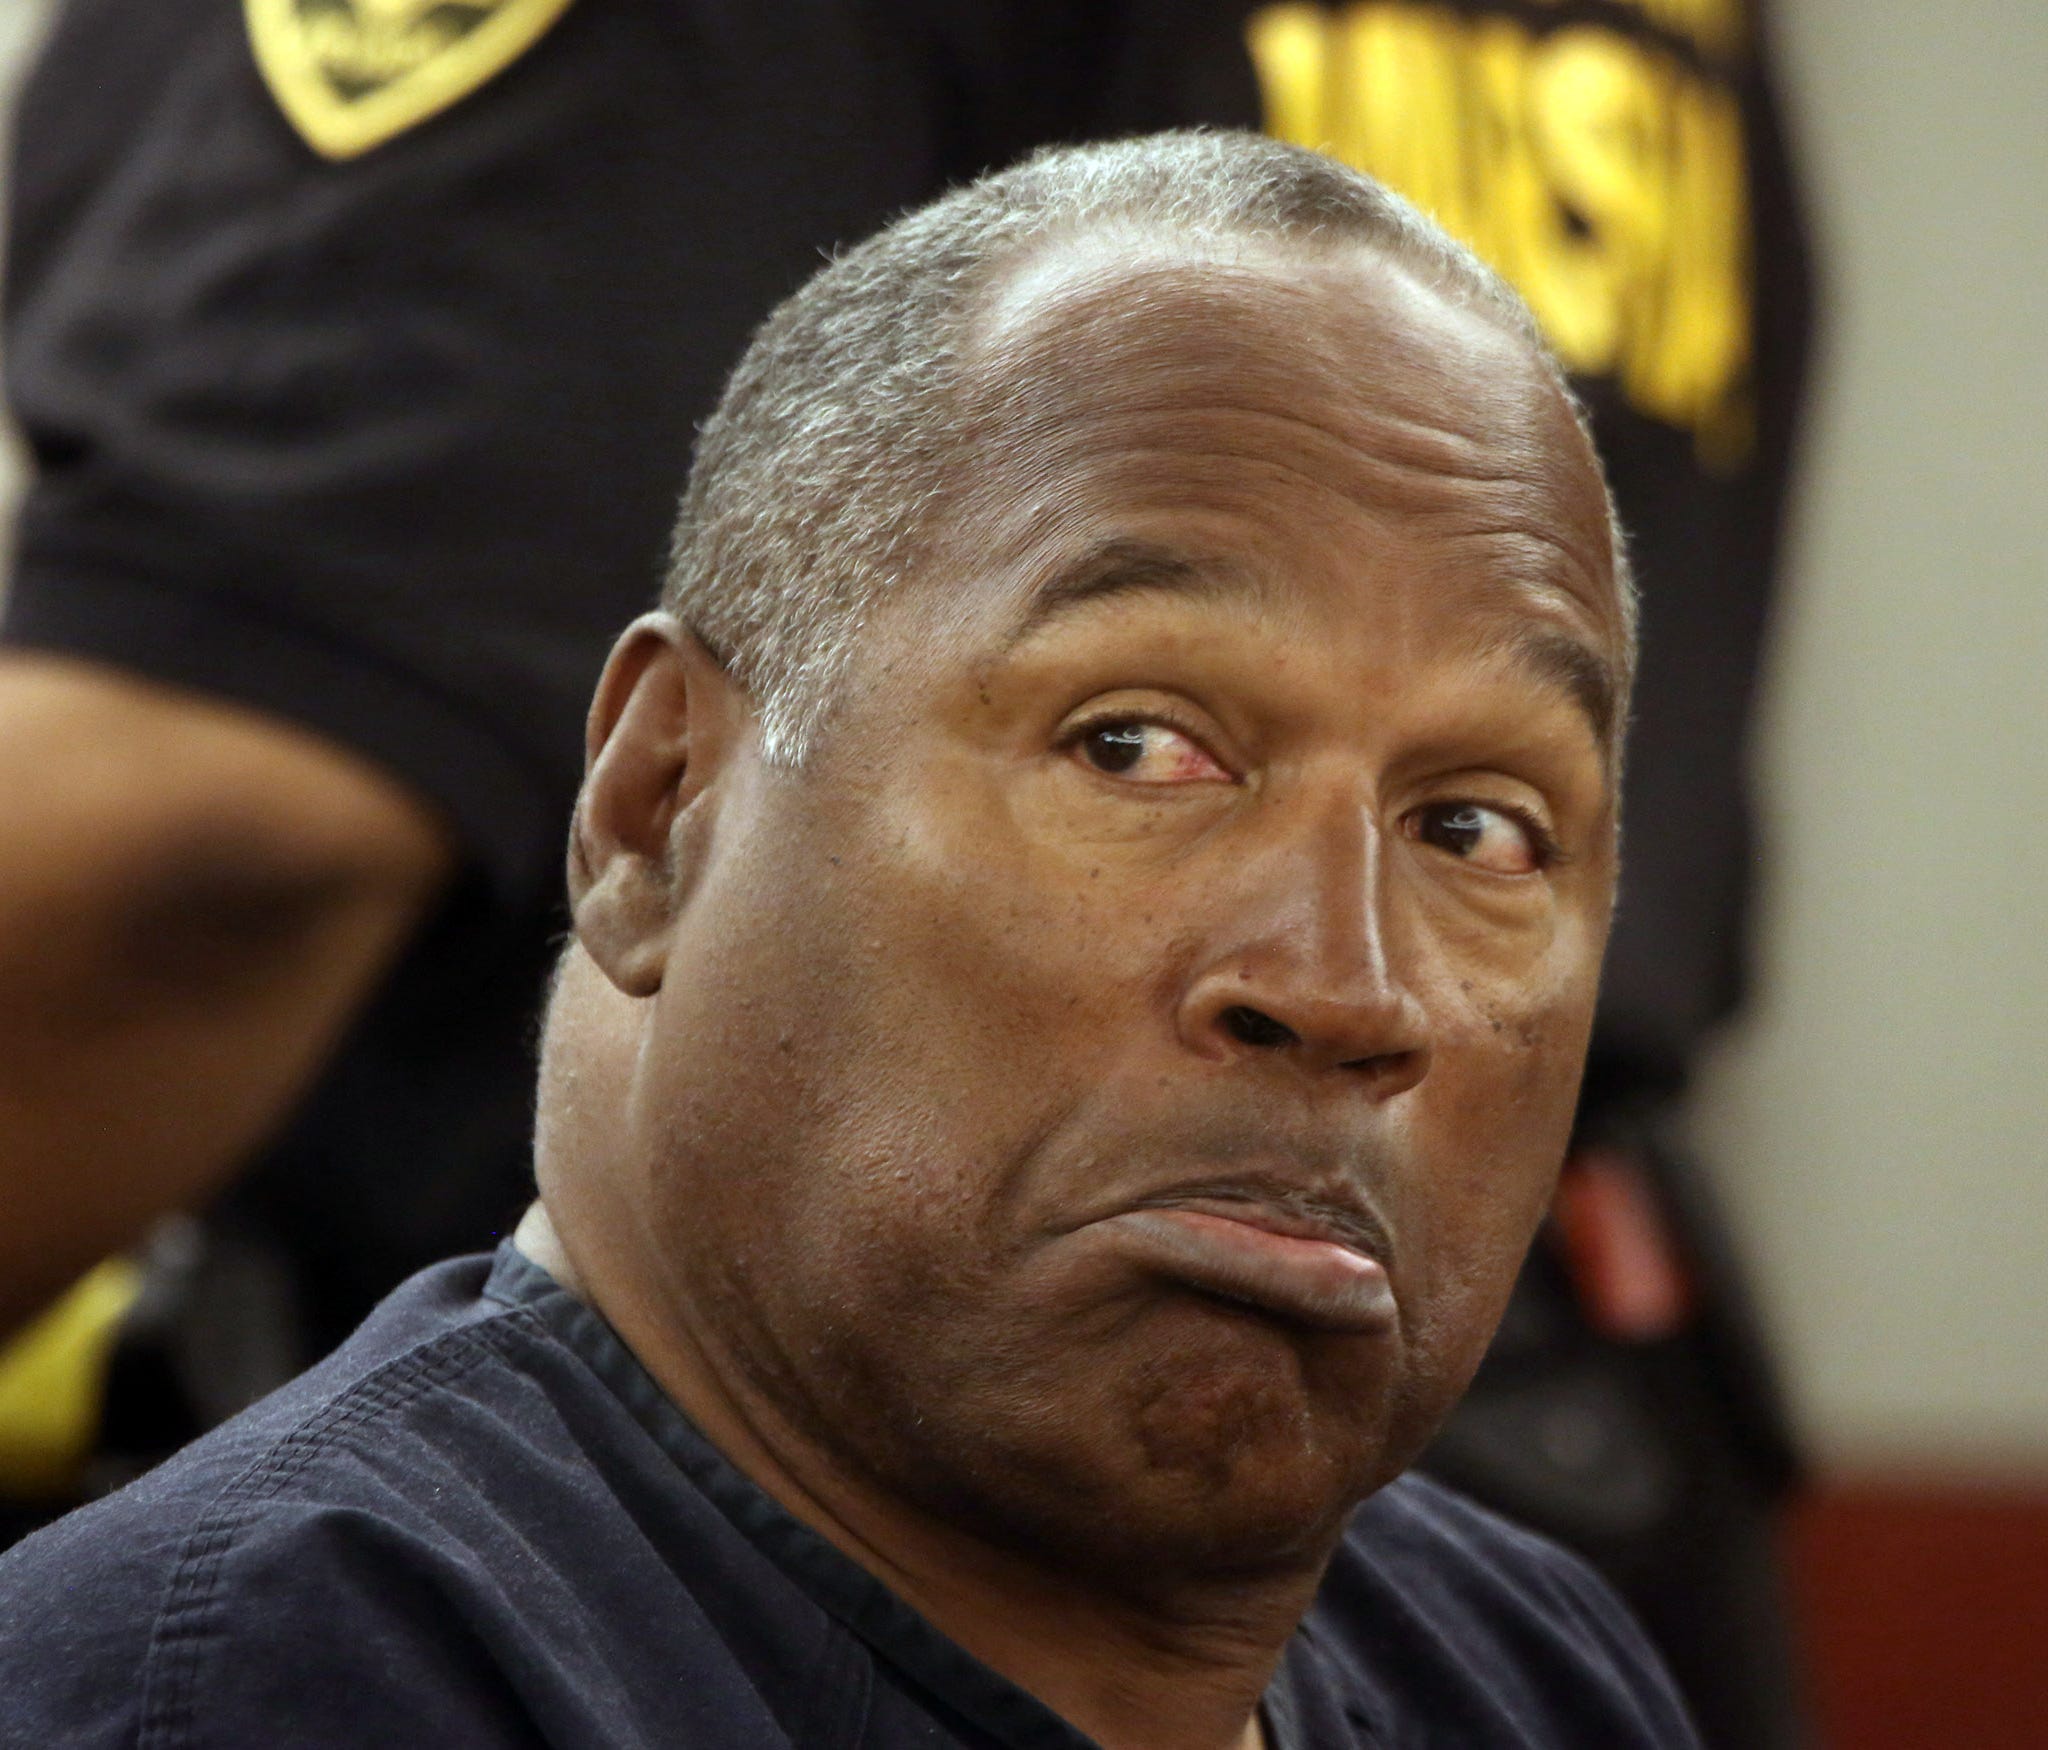 O.J. Simpson, shown at a hearing in 2013, has been in prison since 2008.